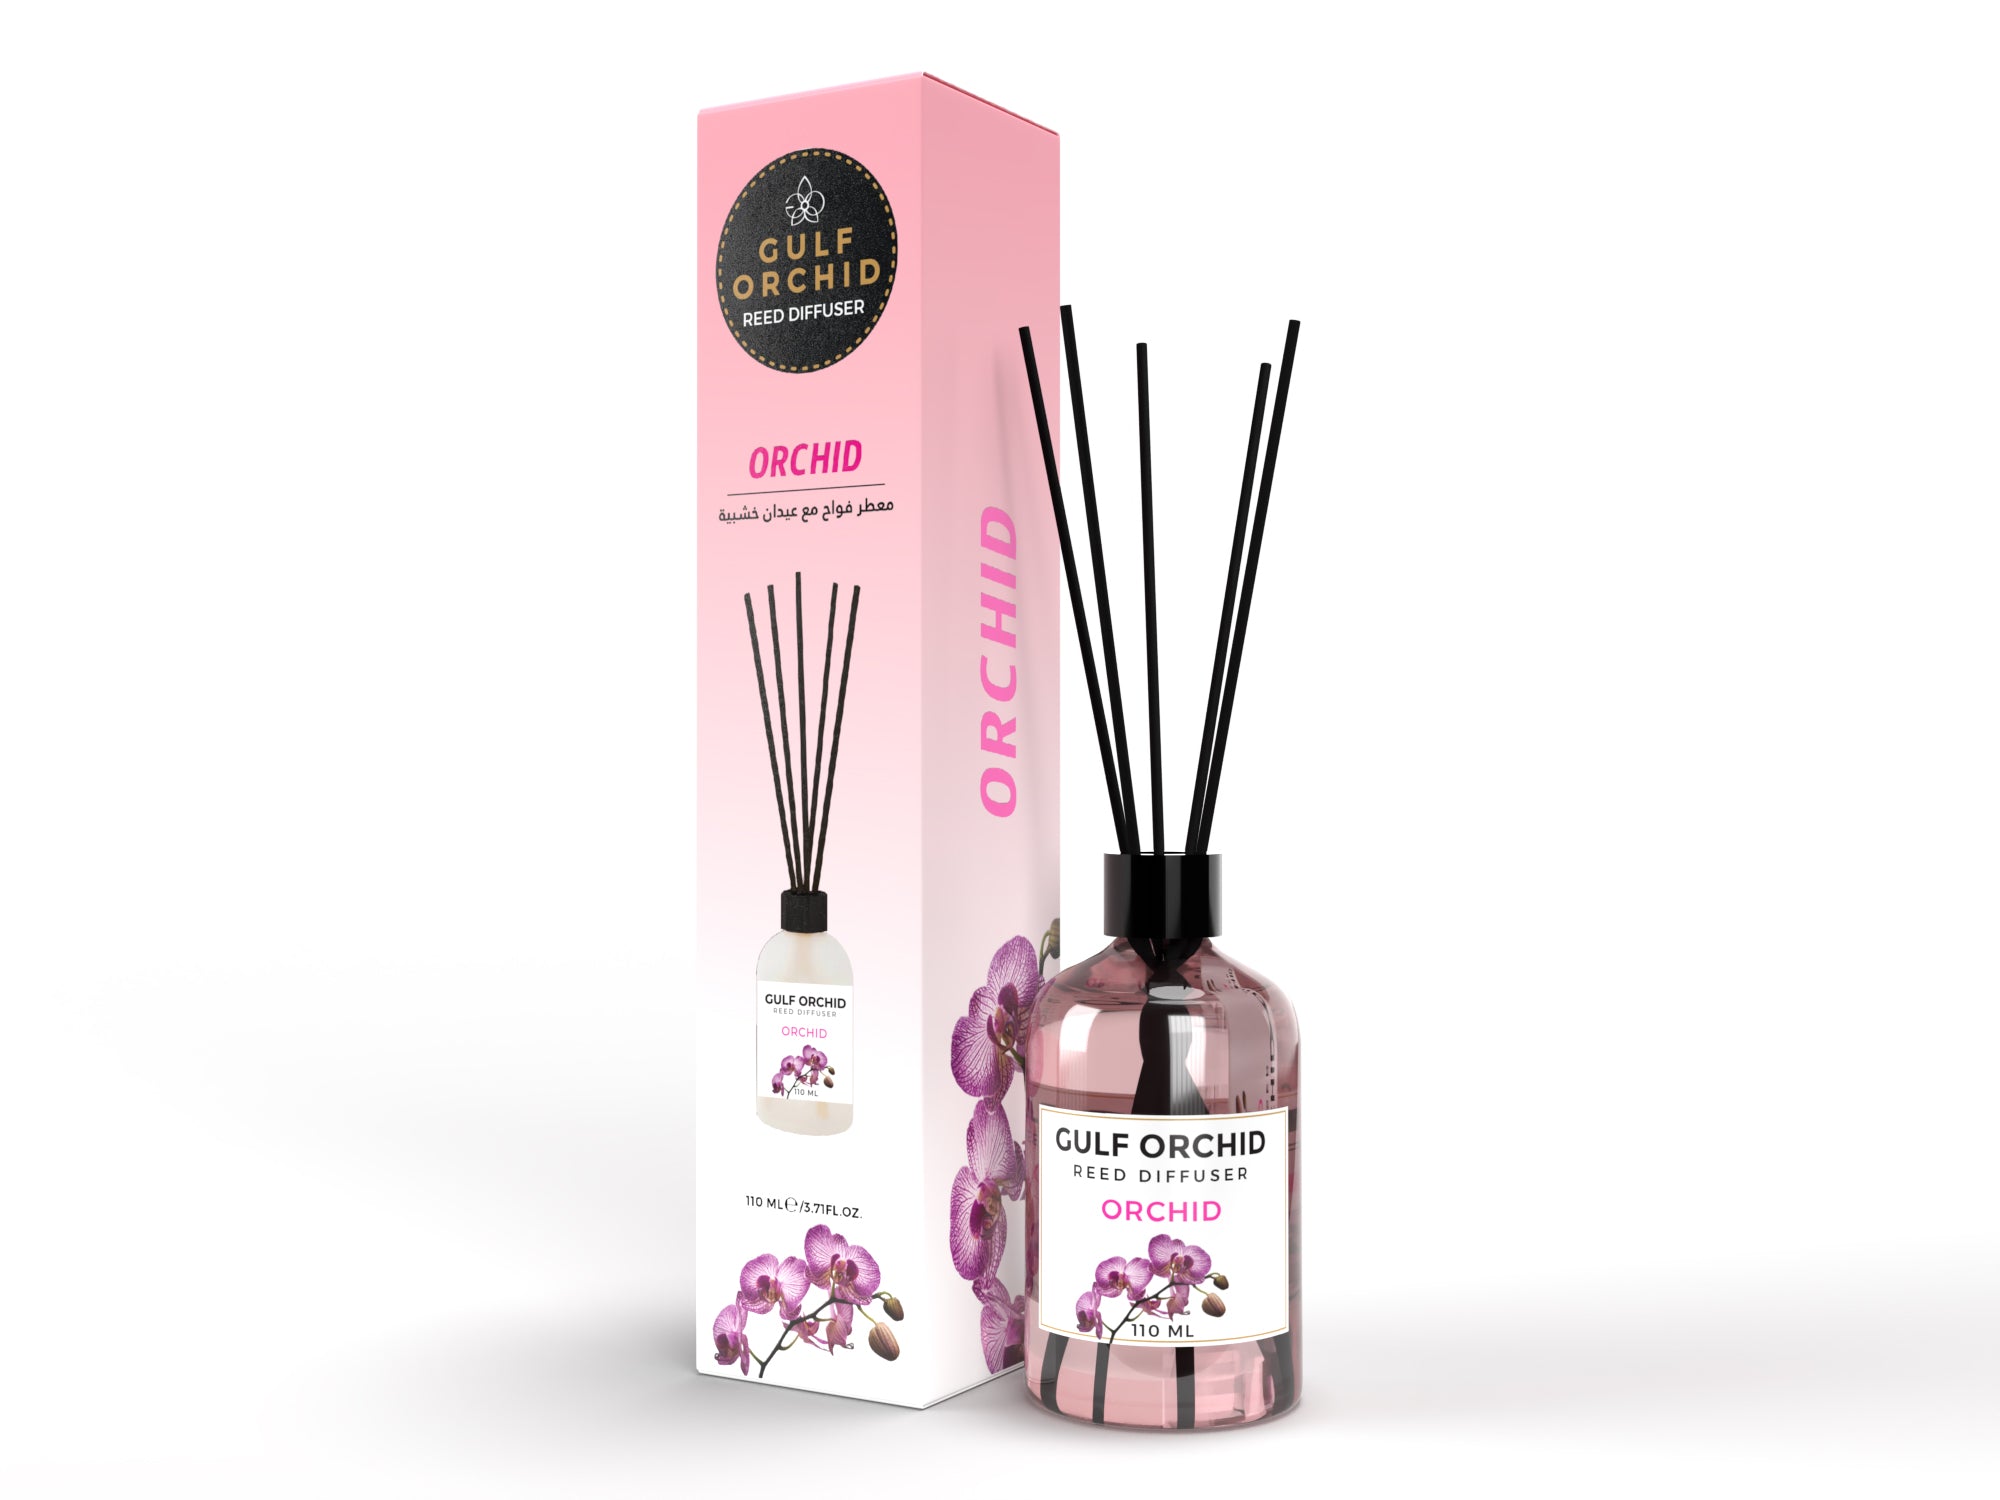 ORCHID - GULF ORCHID REED DIFFUSER 110 ML